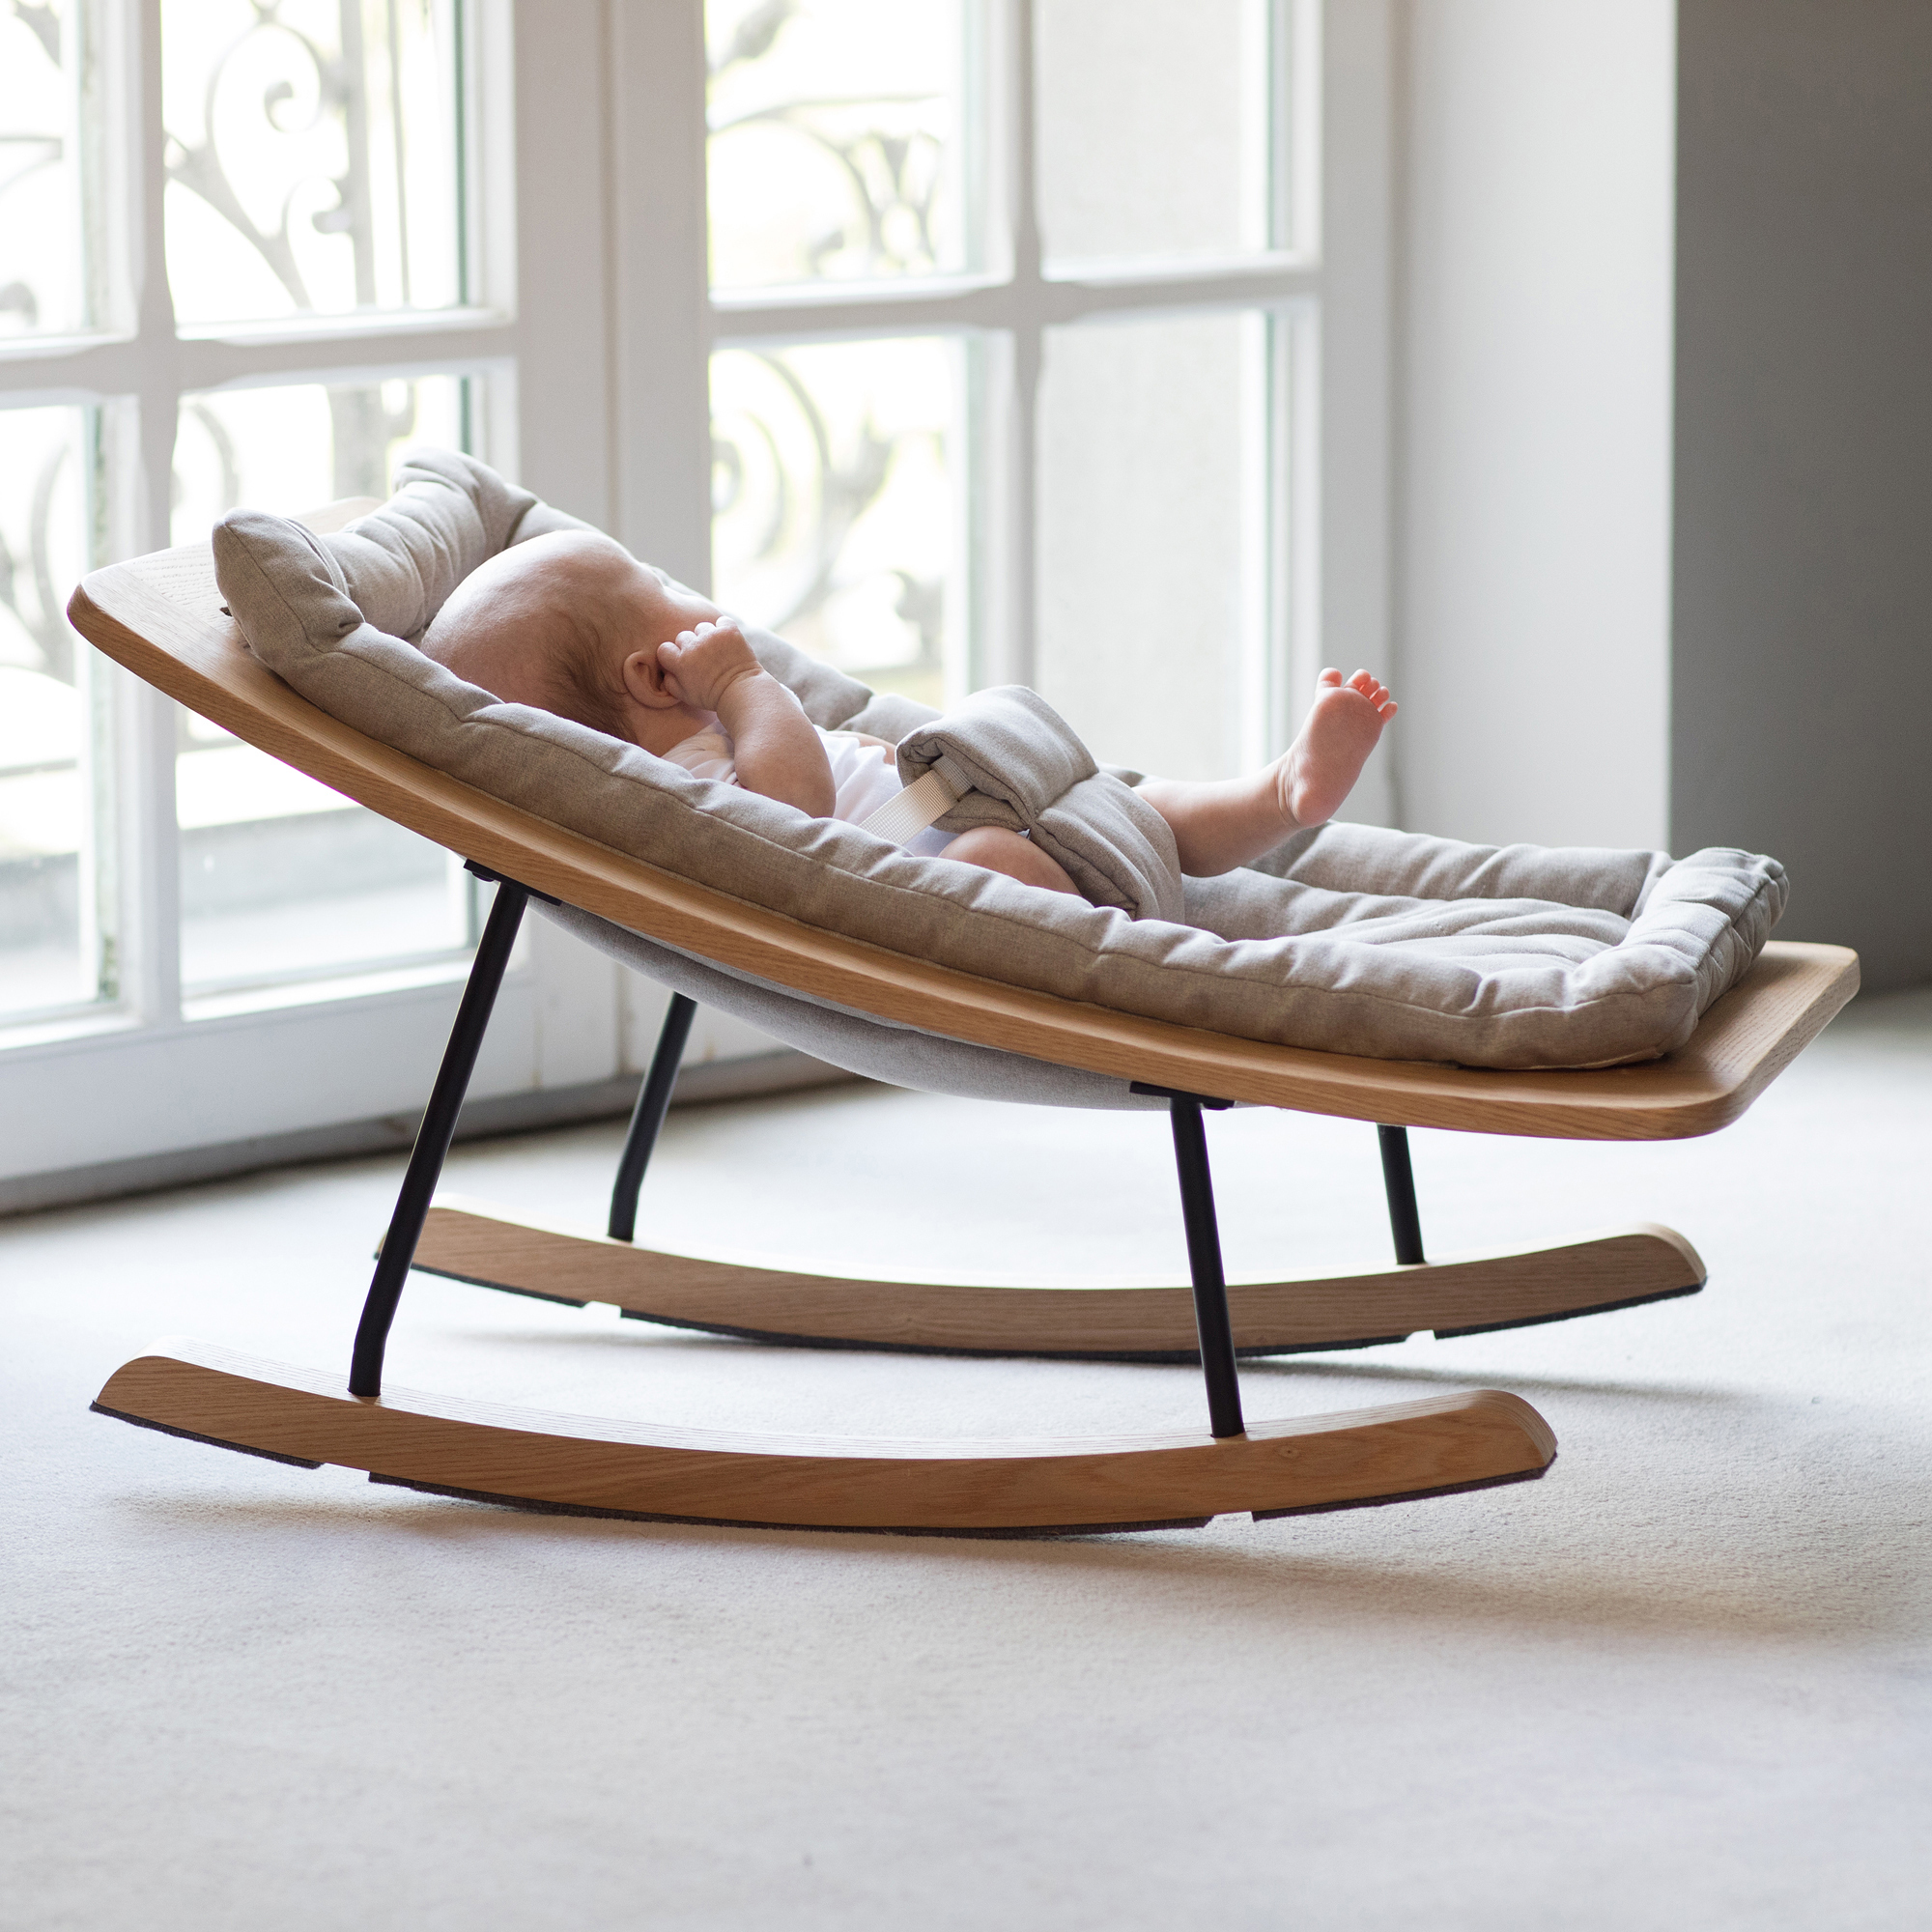 Quax Quax Deluxe Upholstered Baby Rocker Temple Webster